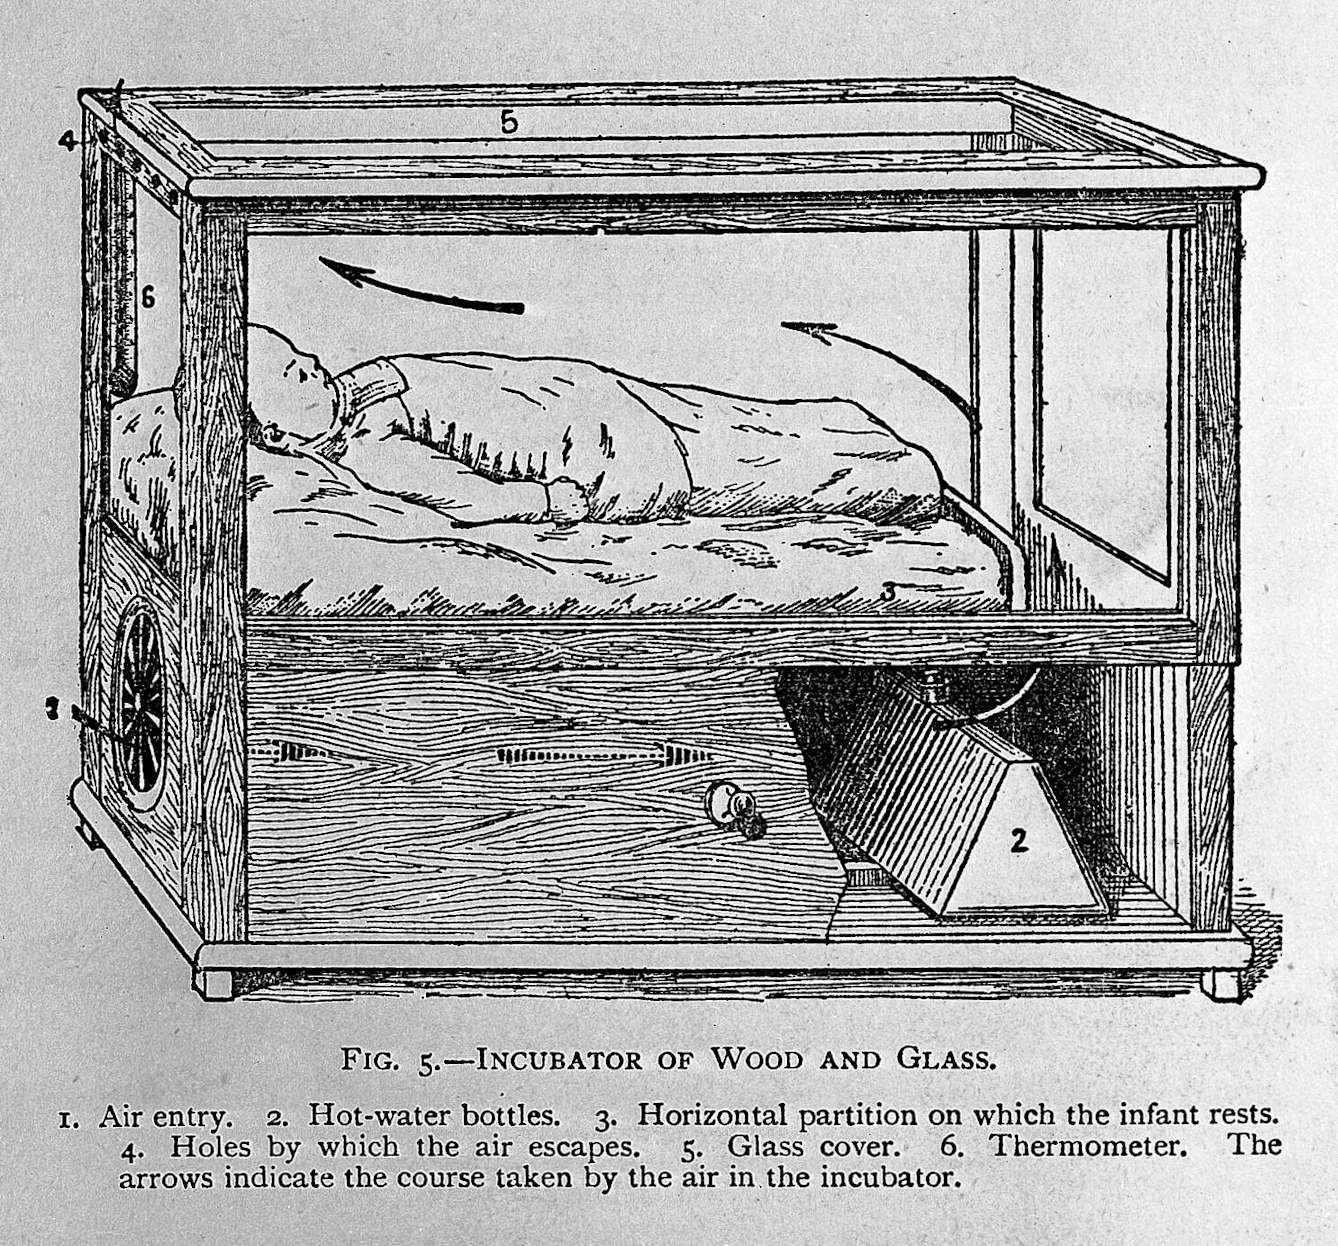 A black and white illustration from a book showing a diagram of an incubator made of wood and glass. The incubator is box shaped, and a baby is visible inside. Text below the image reads: Fig. 5, Incubator of Wood and Glass, 1. Air entry, 2. Hot-water bottles, 3. Horizontal partition on which the infant rests, 4. Holes by which the air escapes, 5. Glass cover, 6. Thermometer. There are arrows indicating the course taken by the air in the incubator.